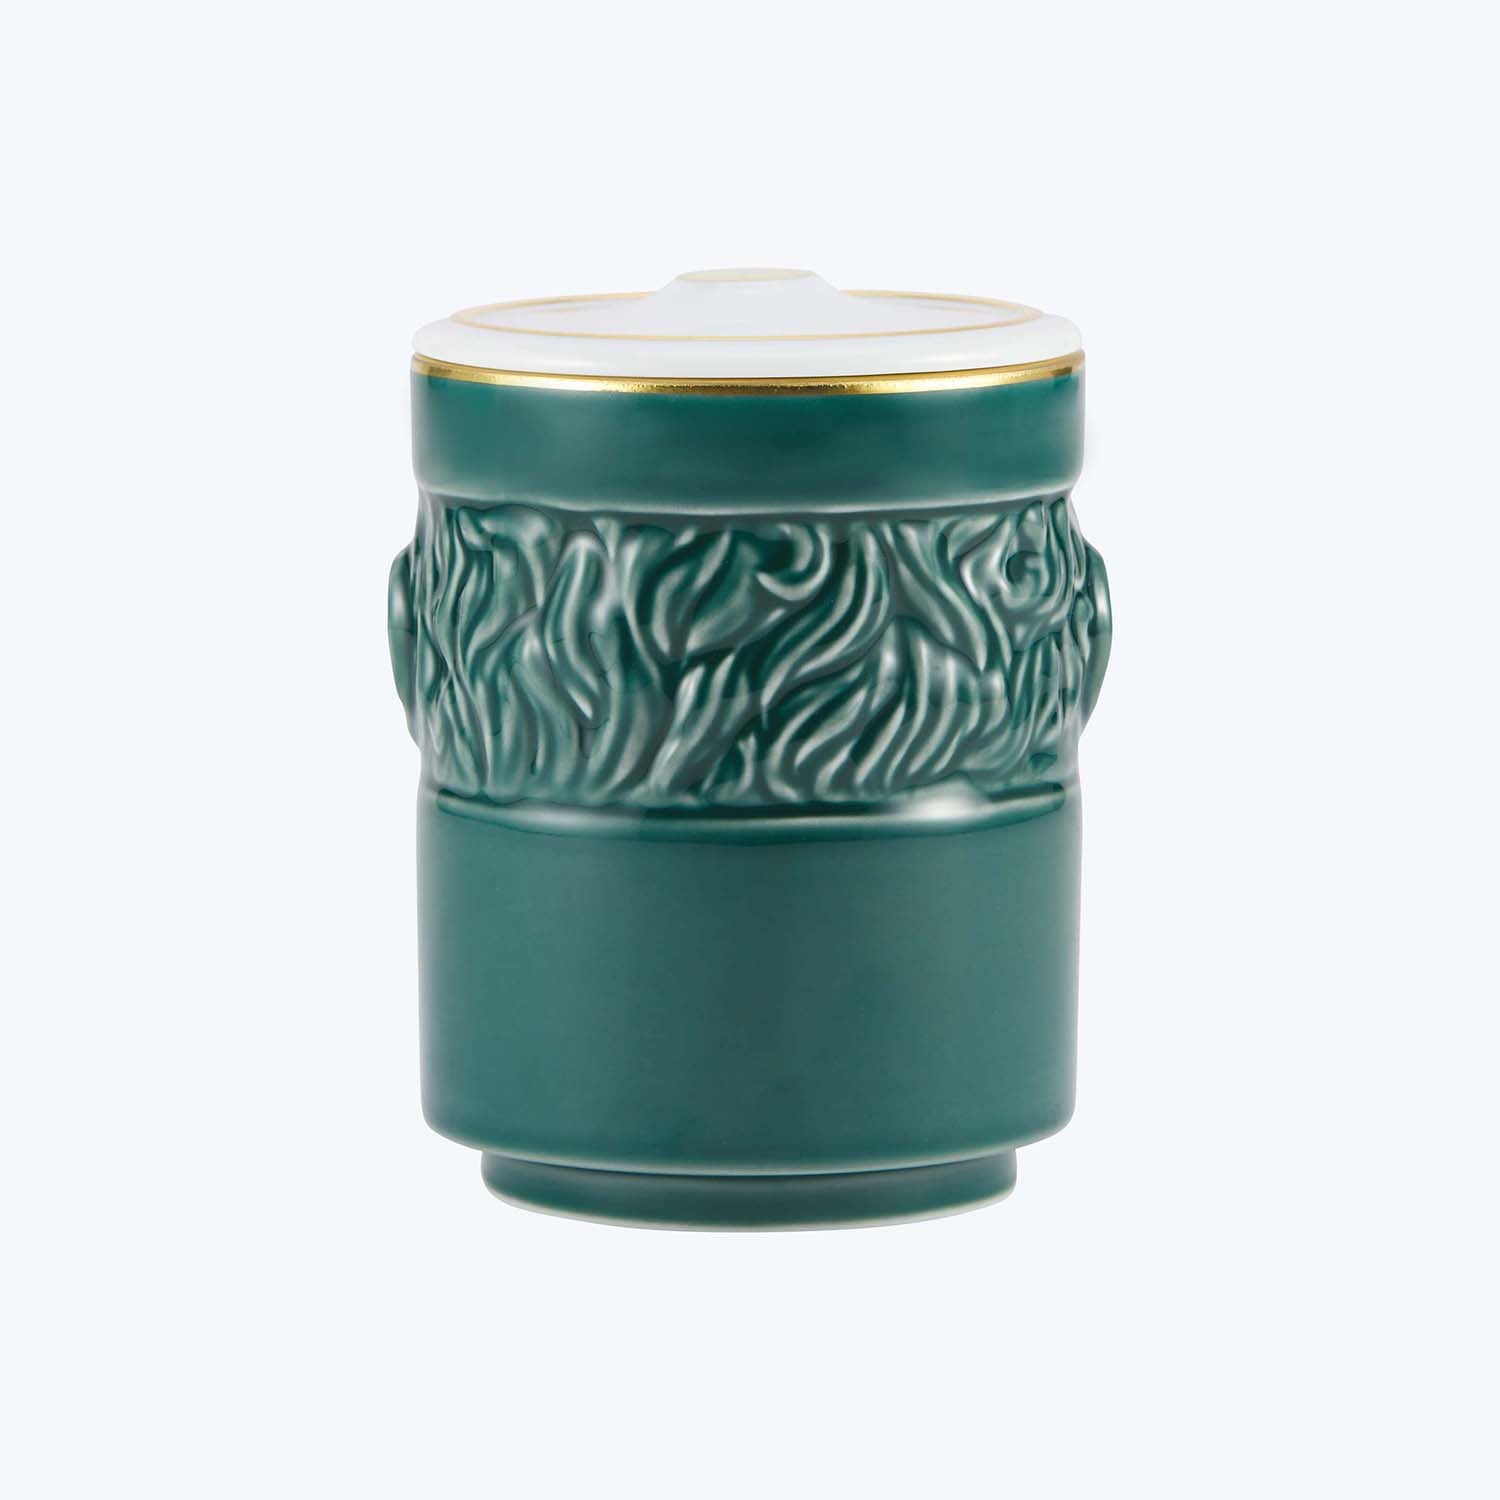 Elegant teal ceramic jar with textured pattern and gold accents.